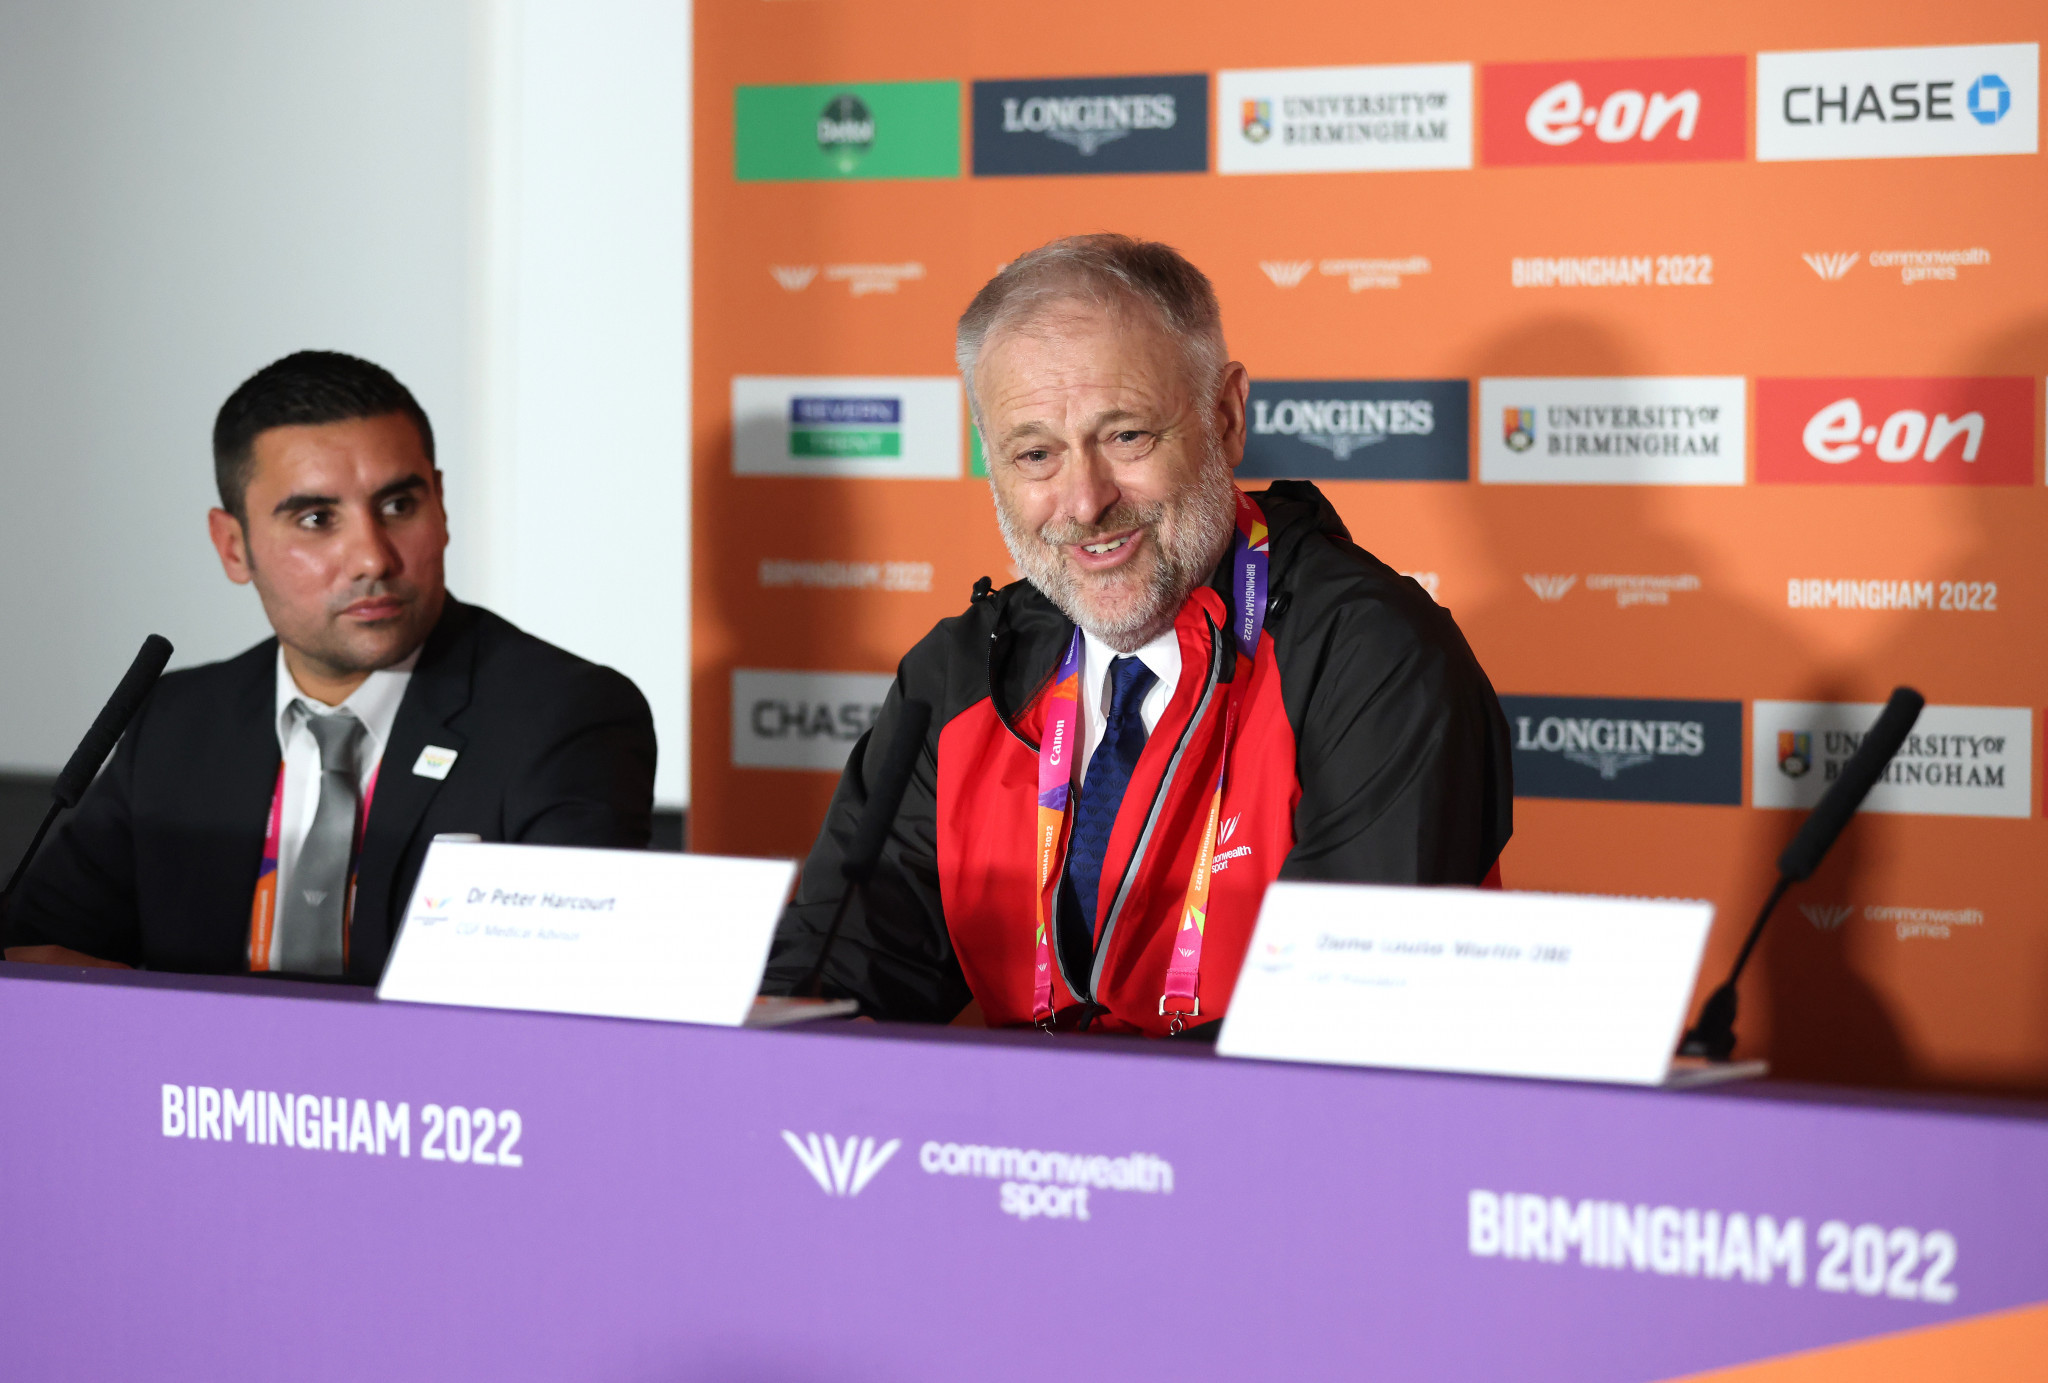 Peter Harcourt, medical advisor for the CGF, claimed Birmingham 2022 was doing an "excellent job" to control the spread of COVID-19 ©Getty Images